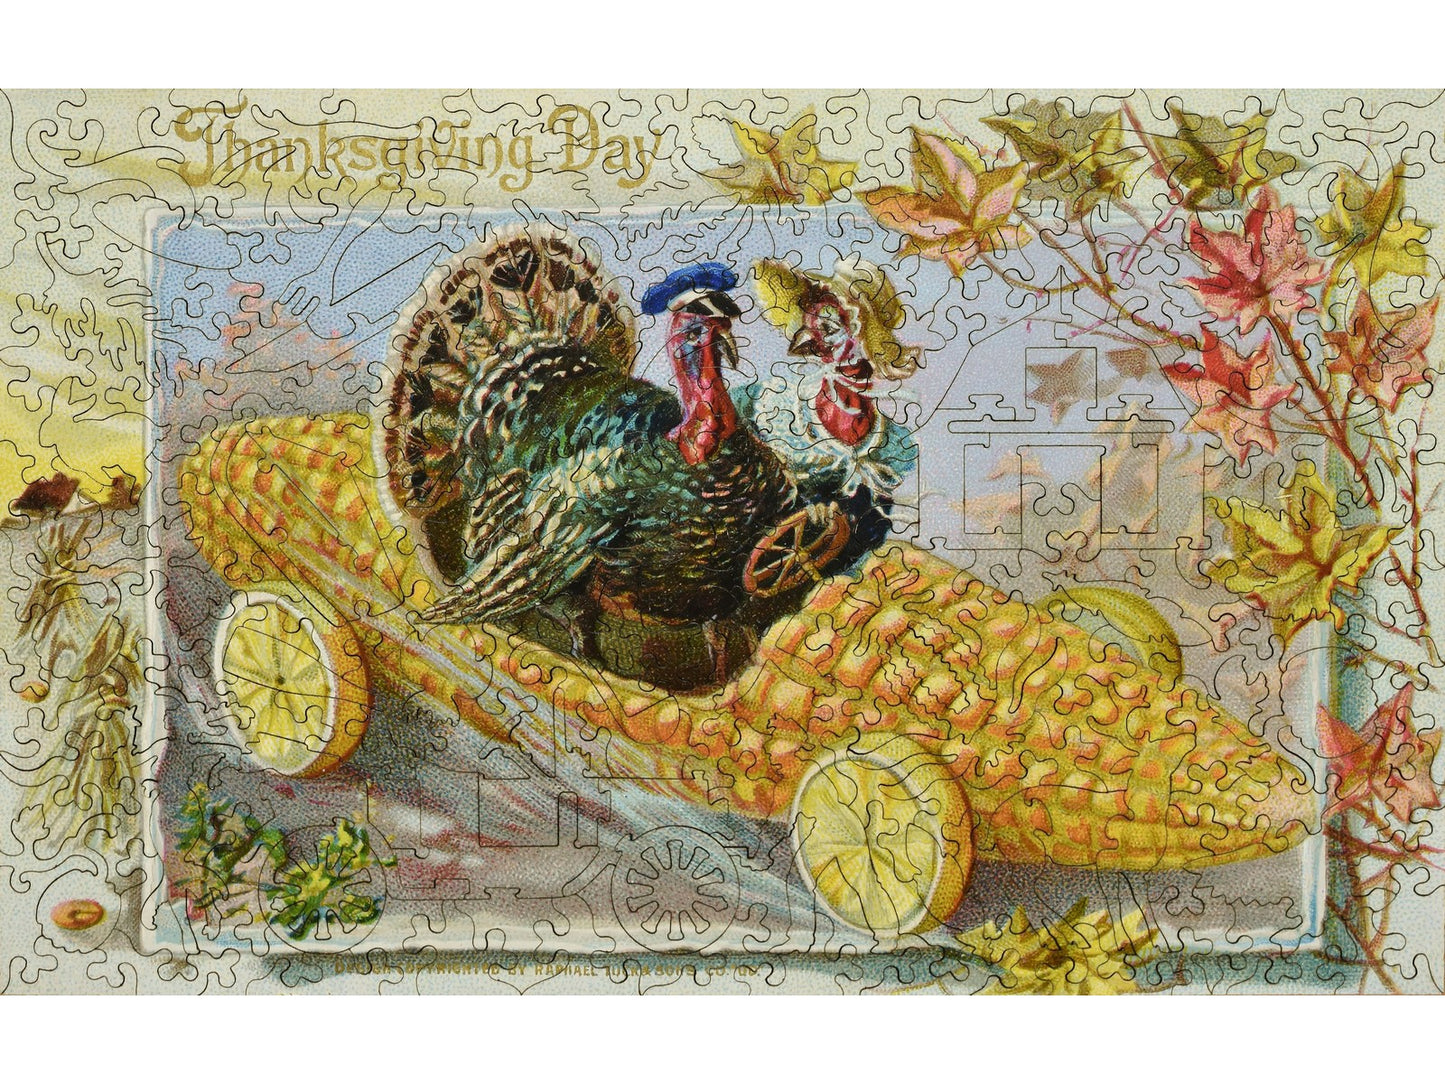 The front of the puzzle, Turkey Derby, which shows two turkeys riding in a corn cob car.